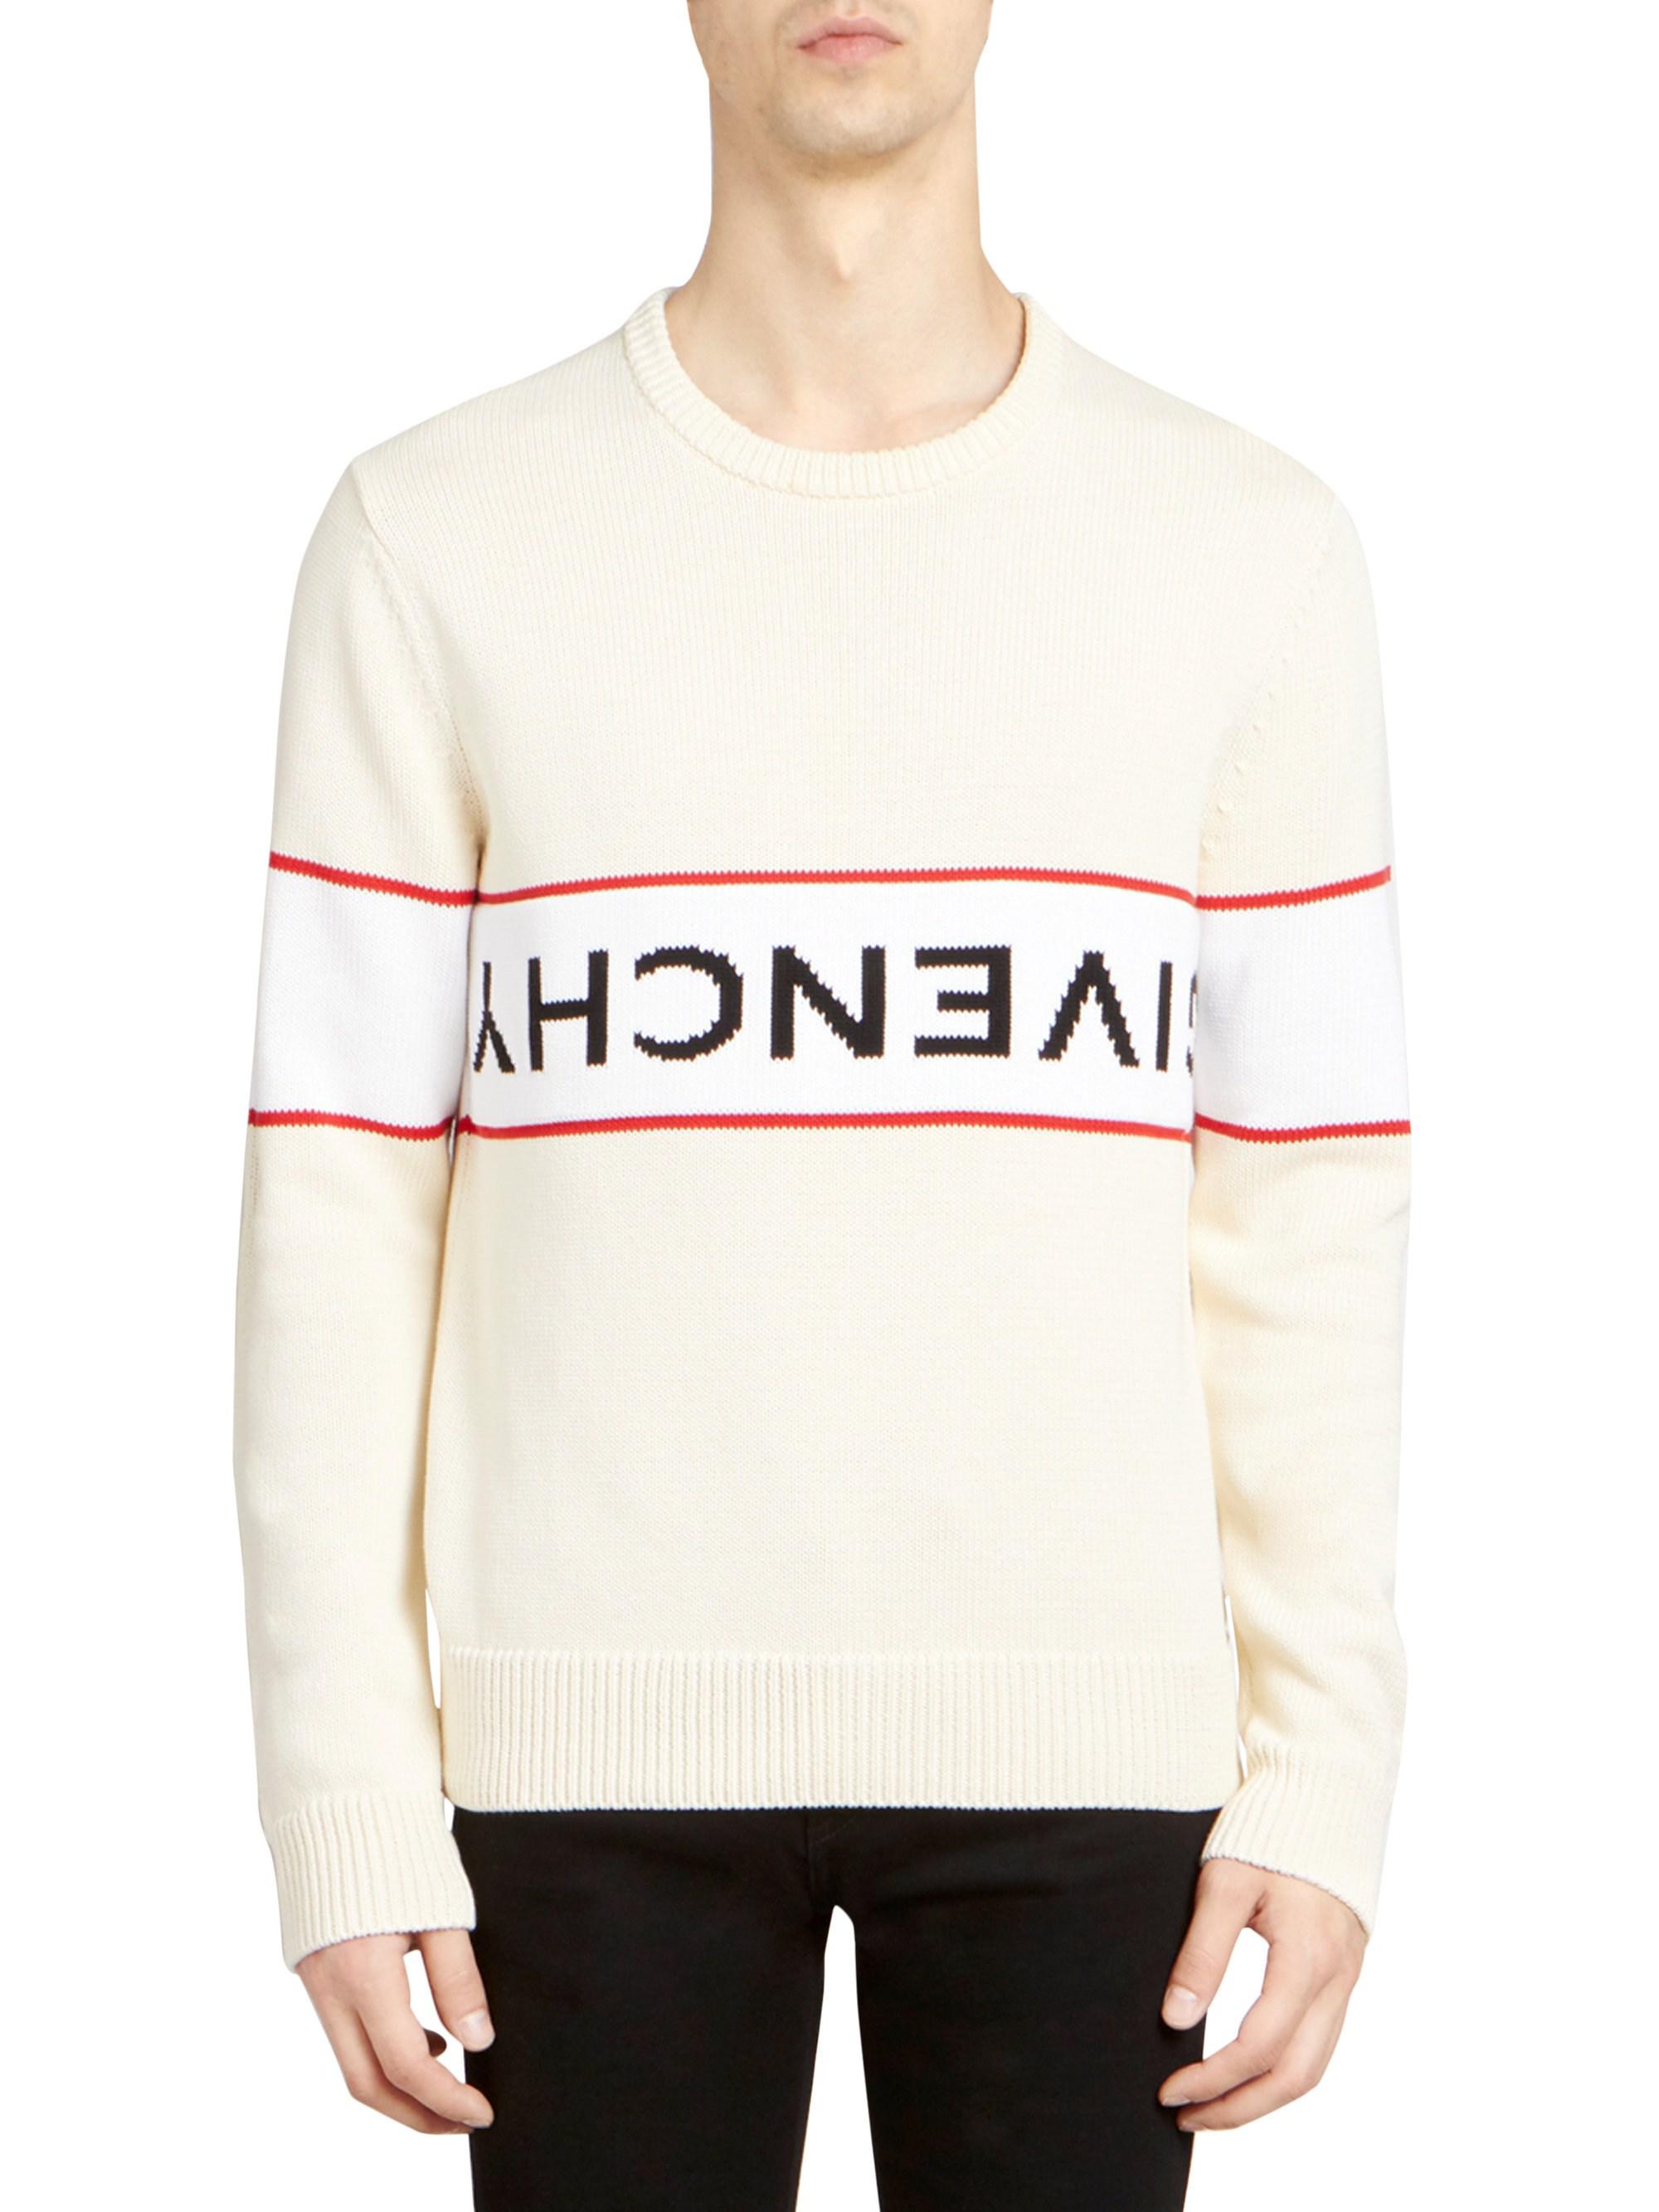 givenchy sweater